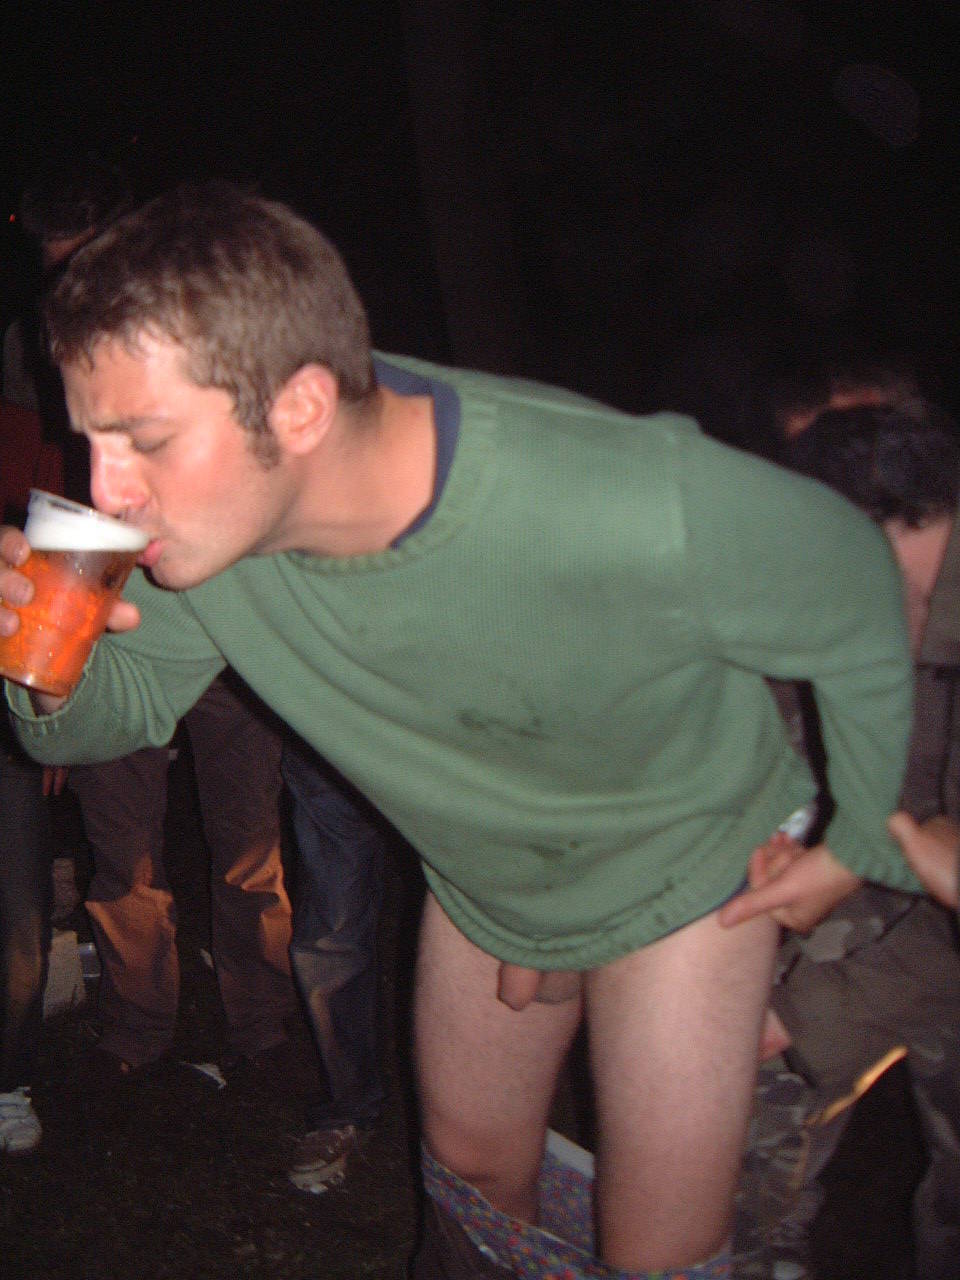 candid drunk guy dick out in public